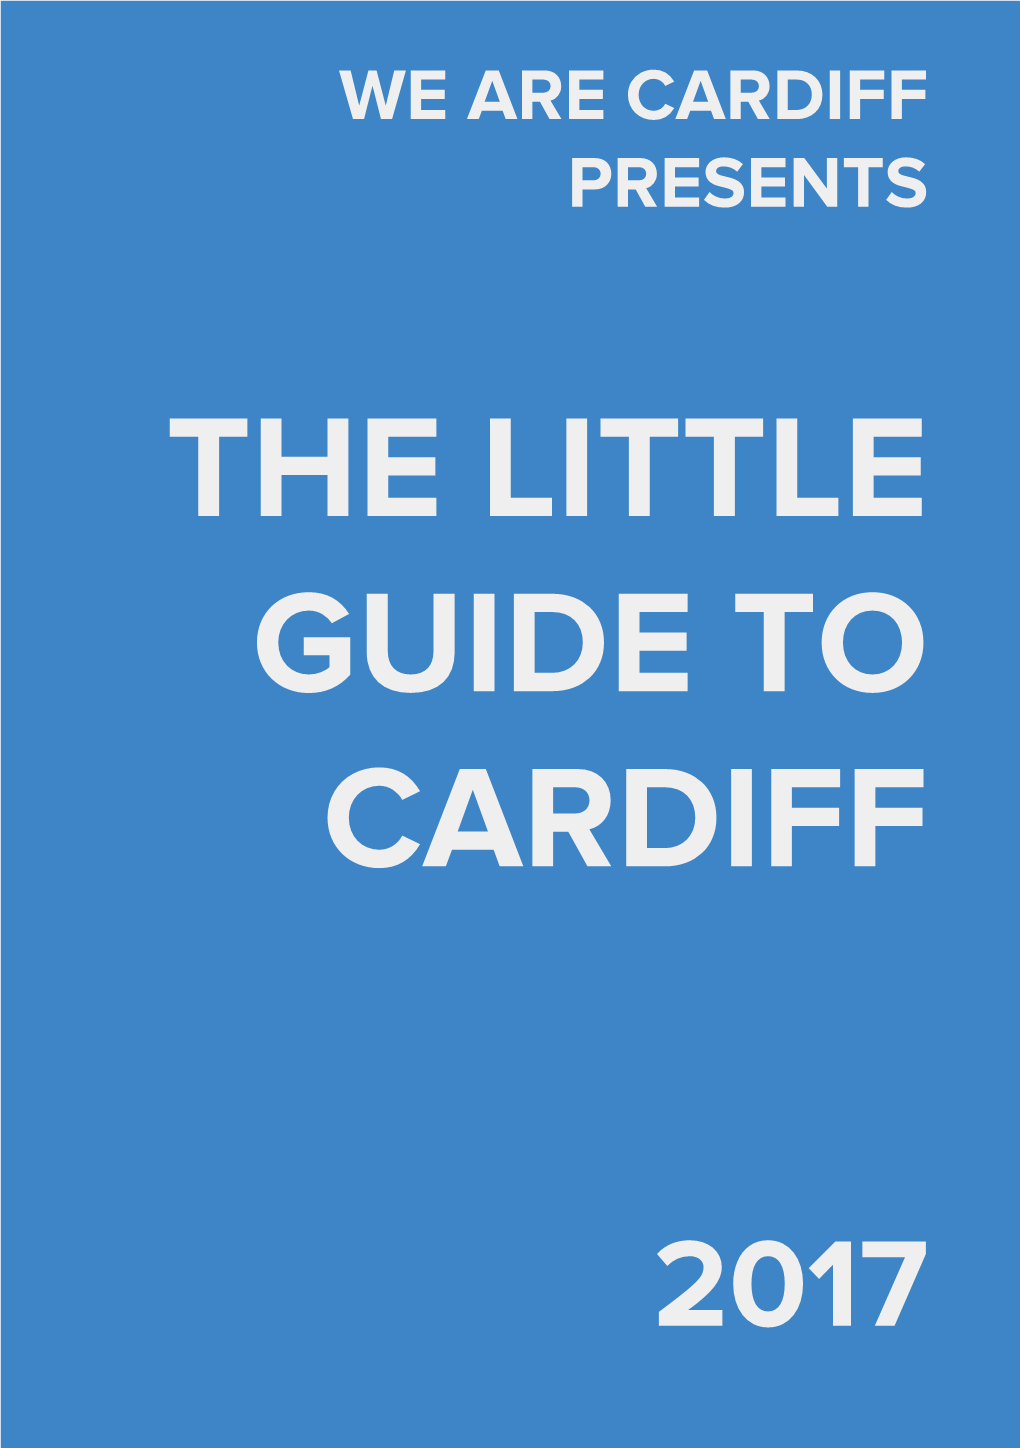 The Little Guide to Cardiff